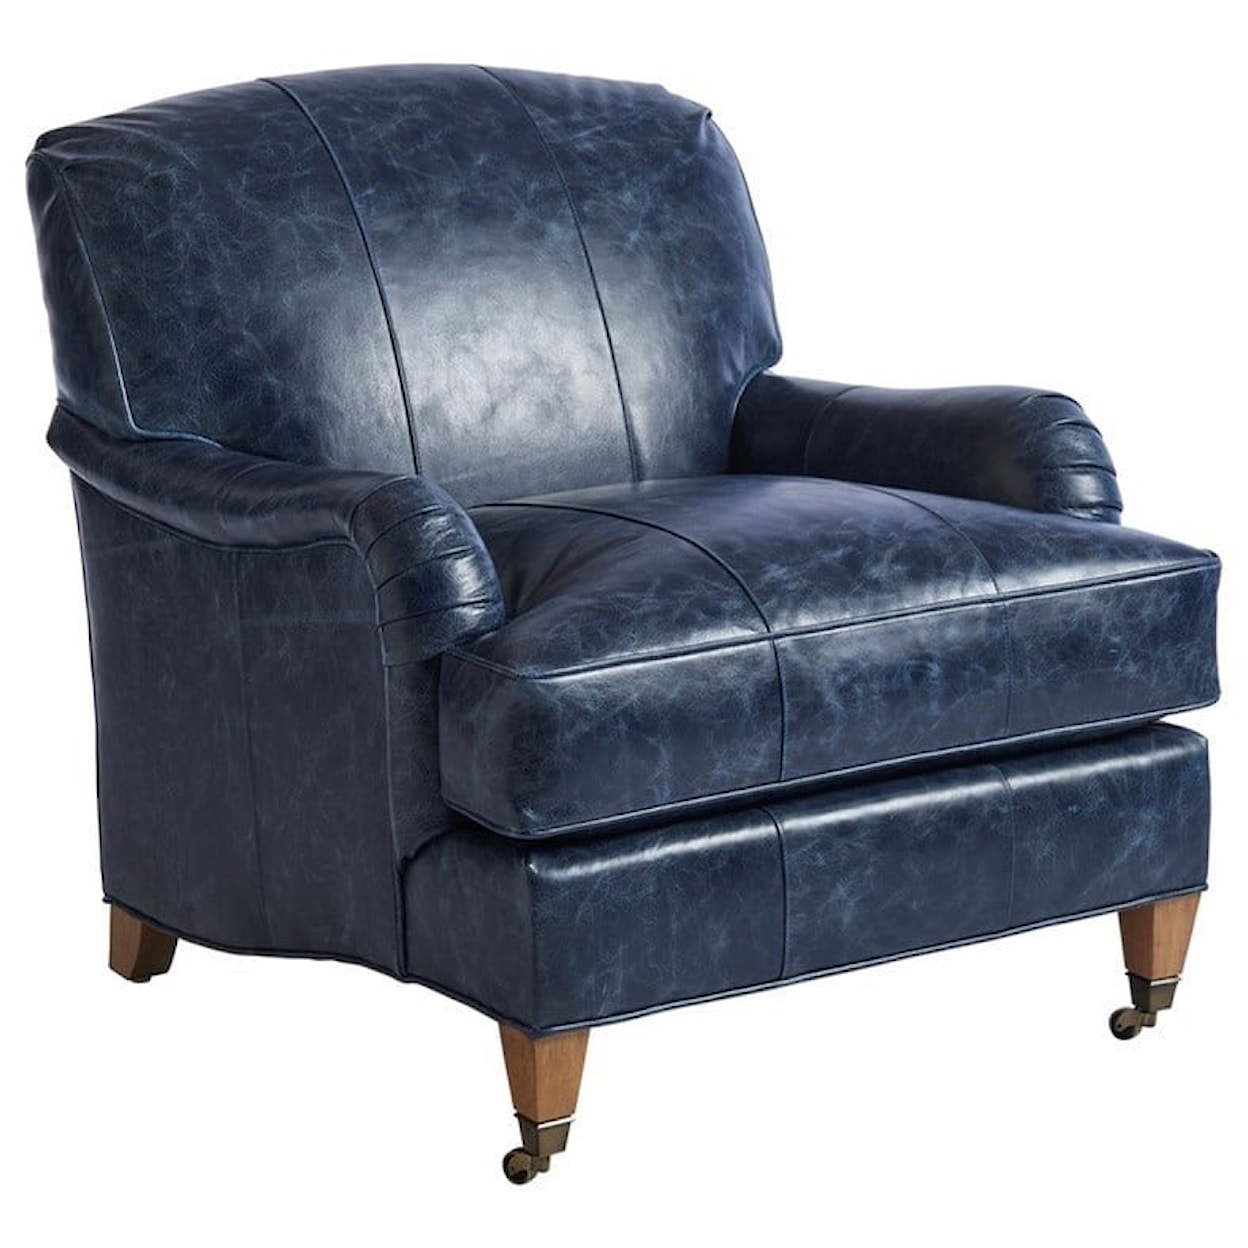 Barclay Butera Barclay Butera Upholstery Sydney Chair With Brass Caster